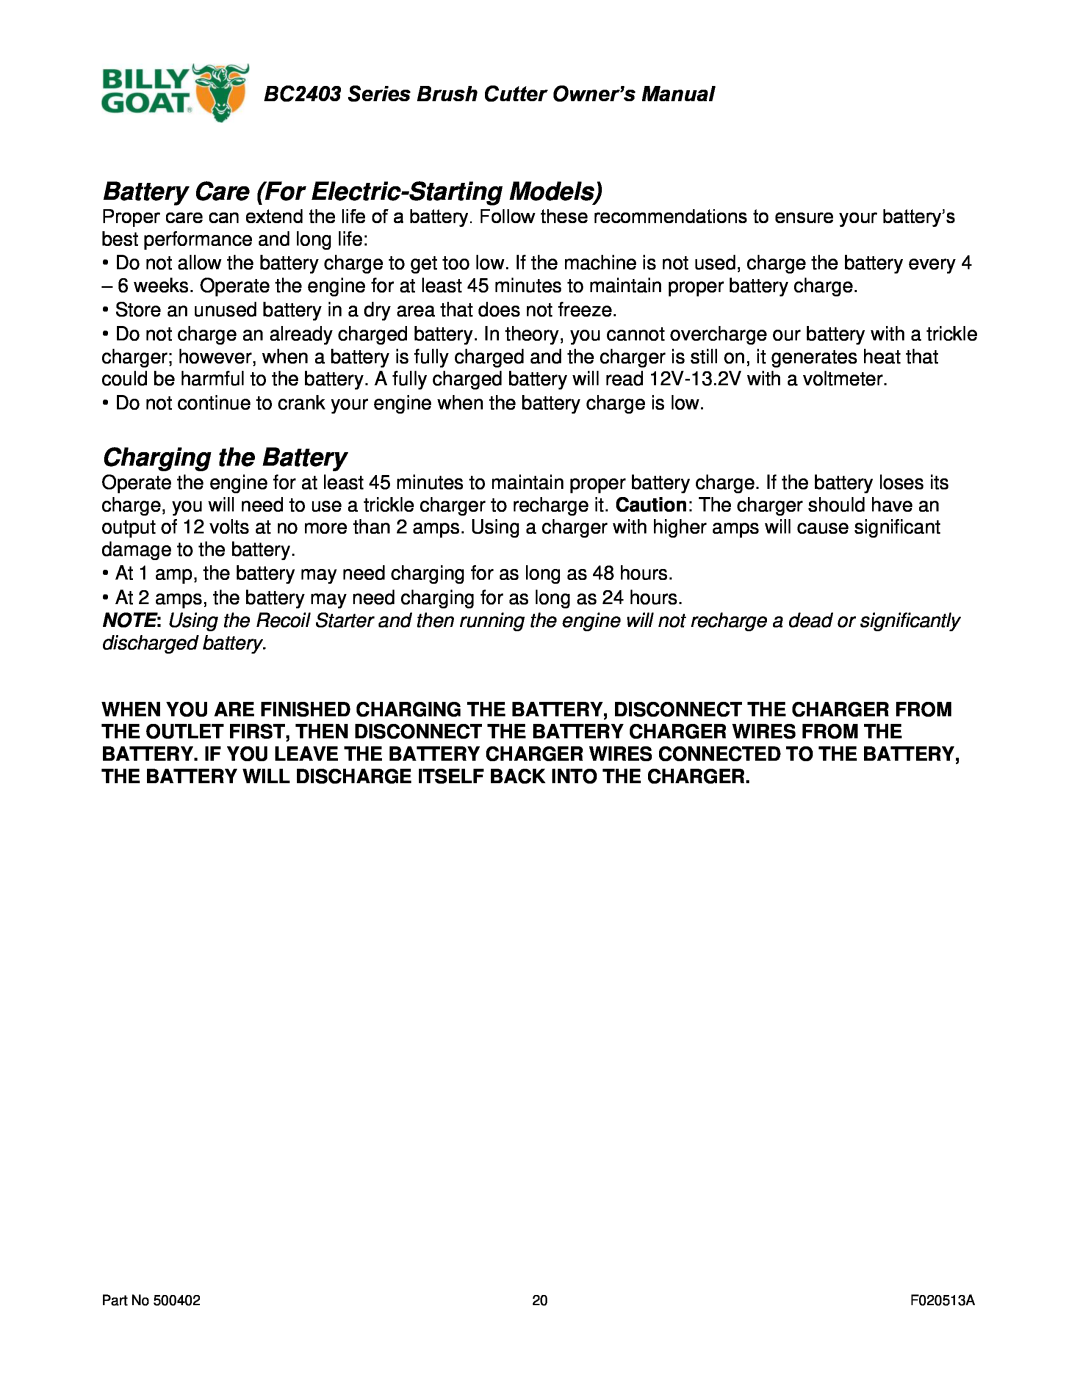 Billy Goat BC2403 owner manual Battery Care For Electric-Starting Models, Charging the Battery 